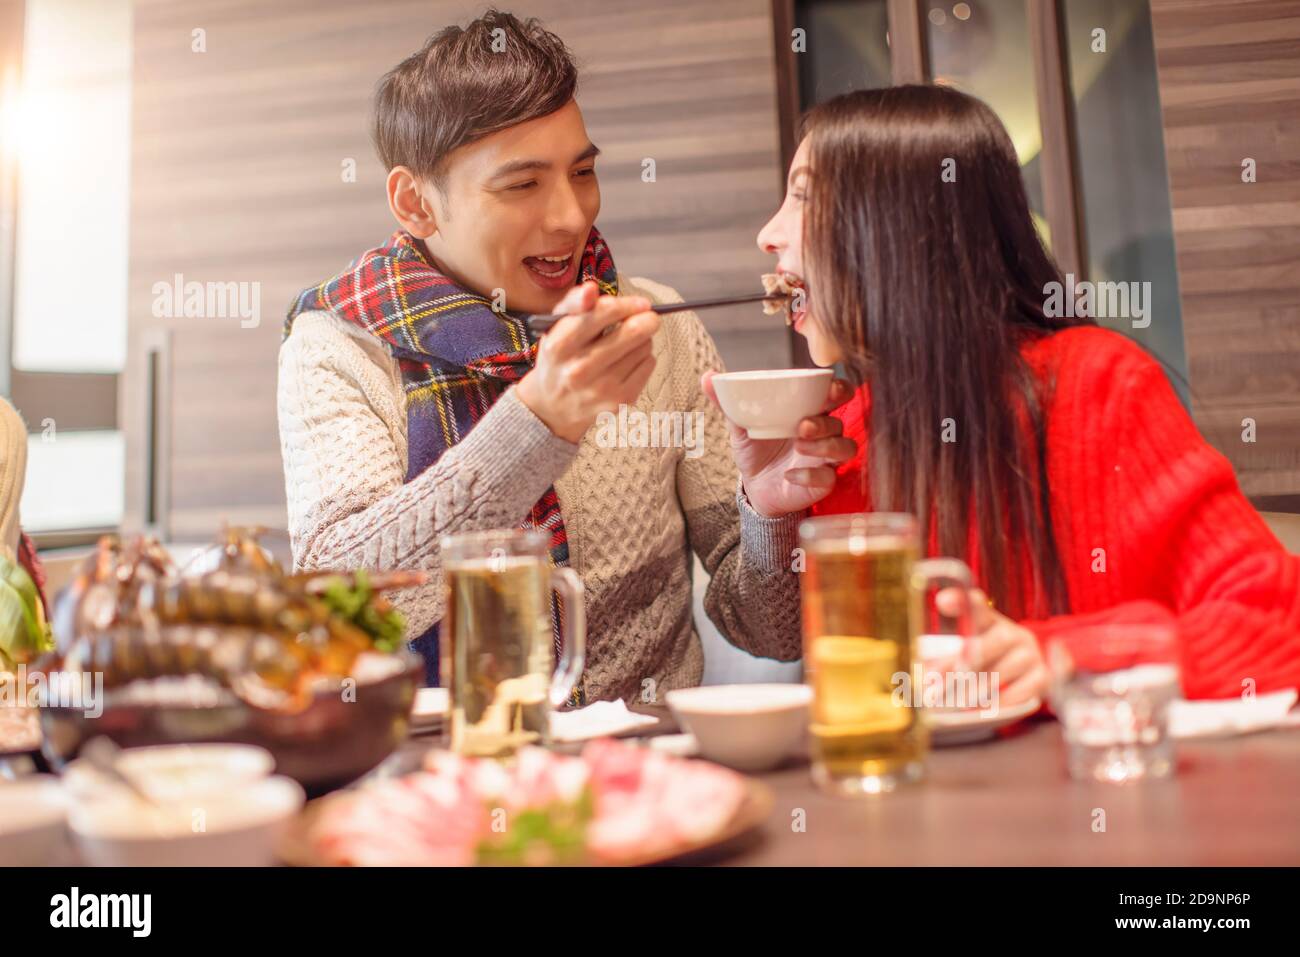 Young man is feeding his girfriend in restaurant Stock Photo